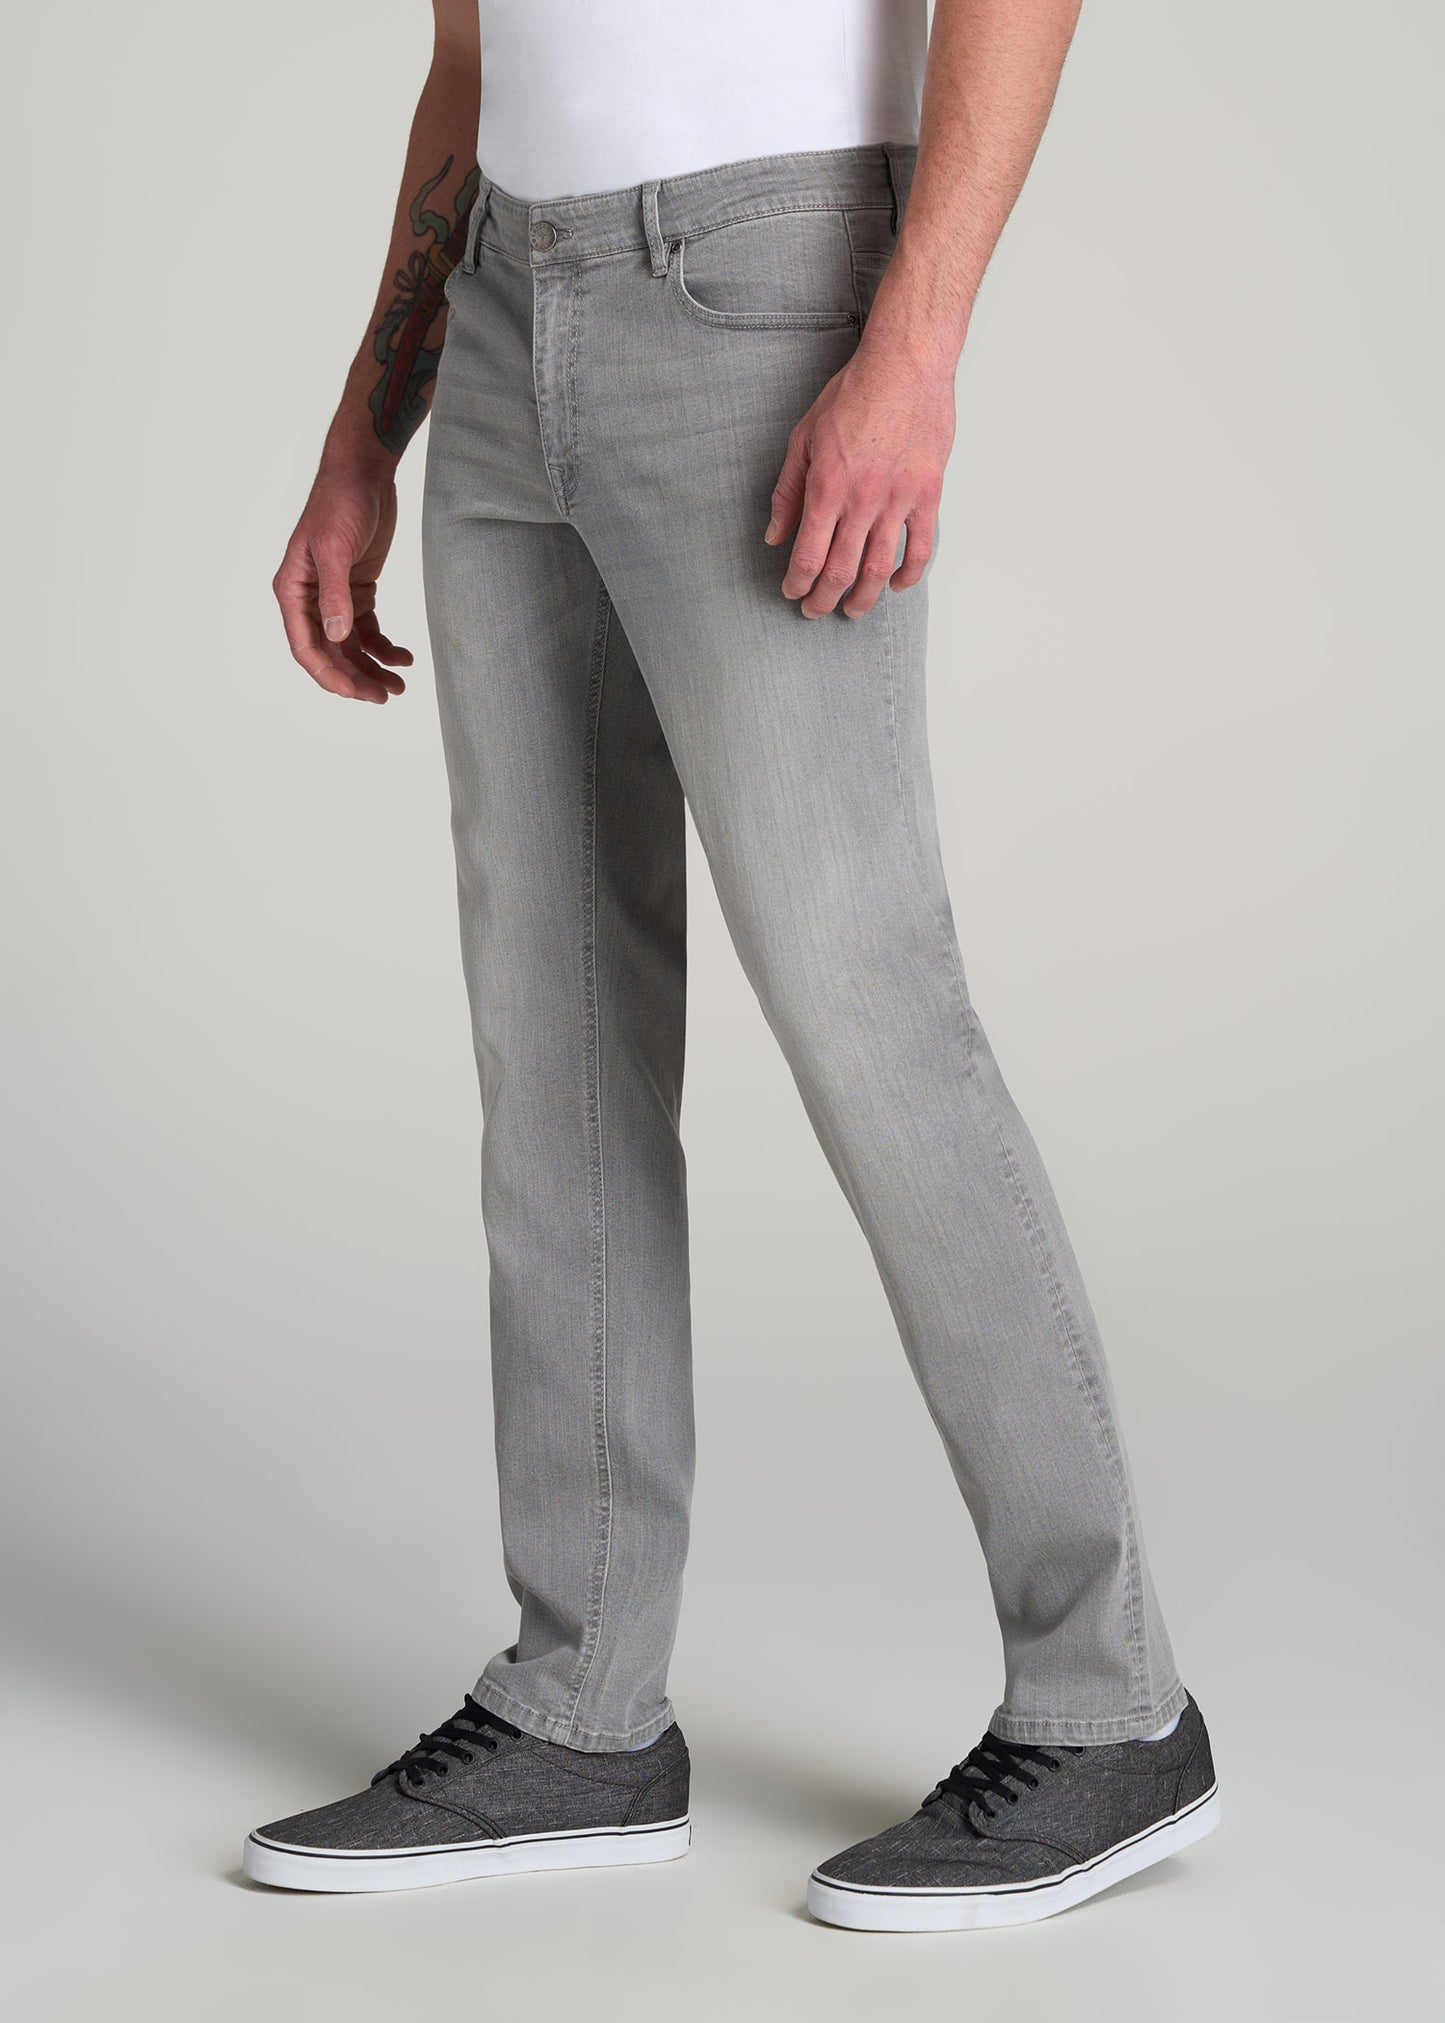       American-Tall-Men-Carman-Tapered-Fit-Jeans-Concrete-Grey-side